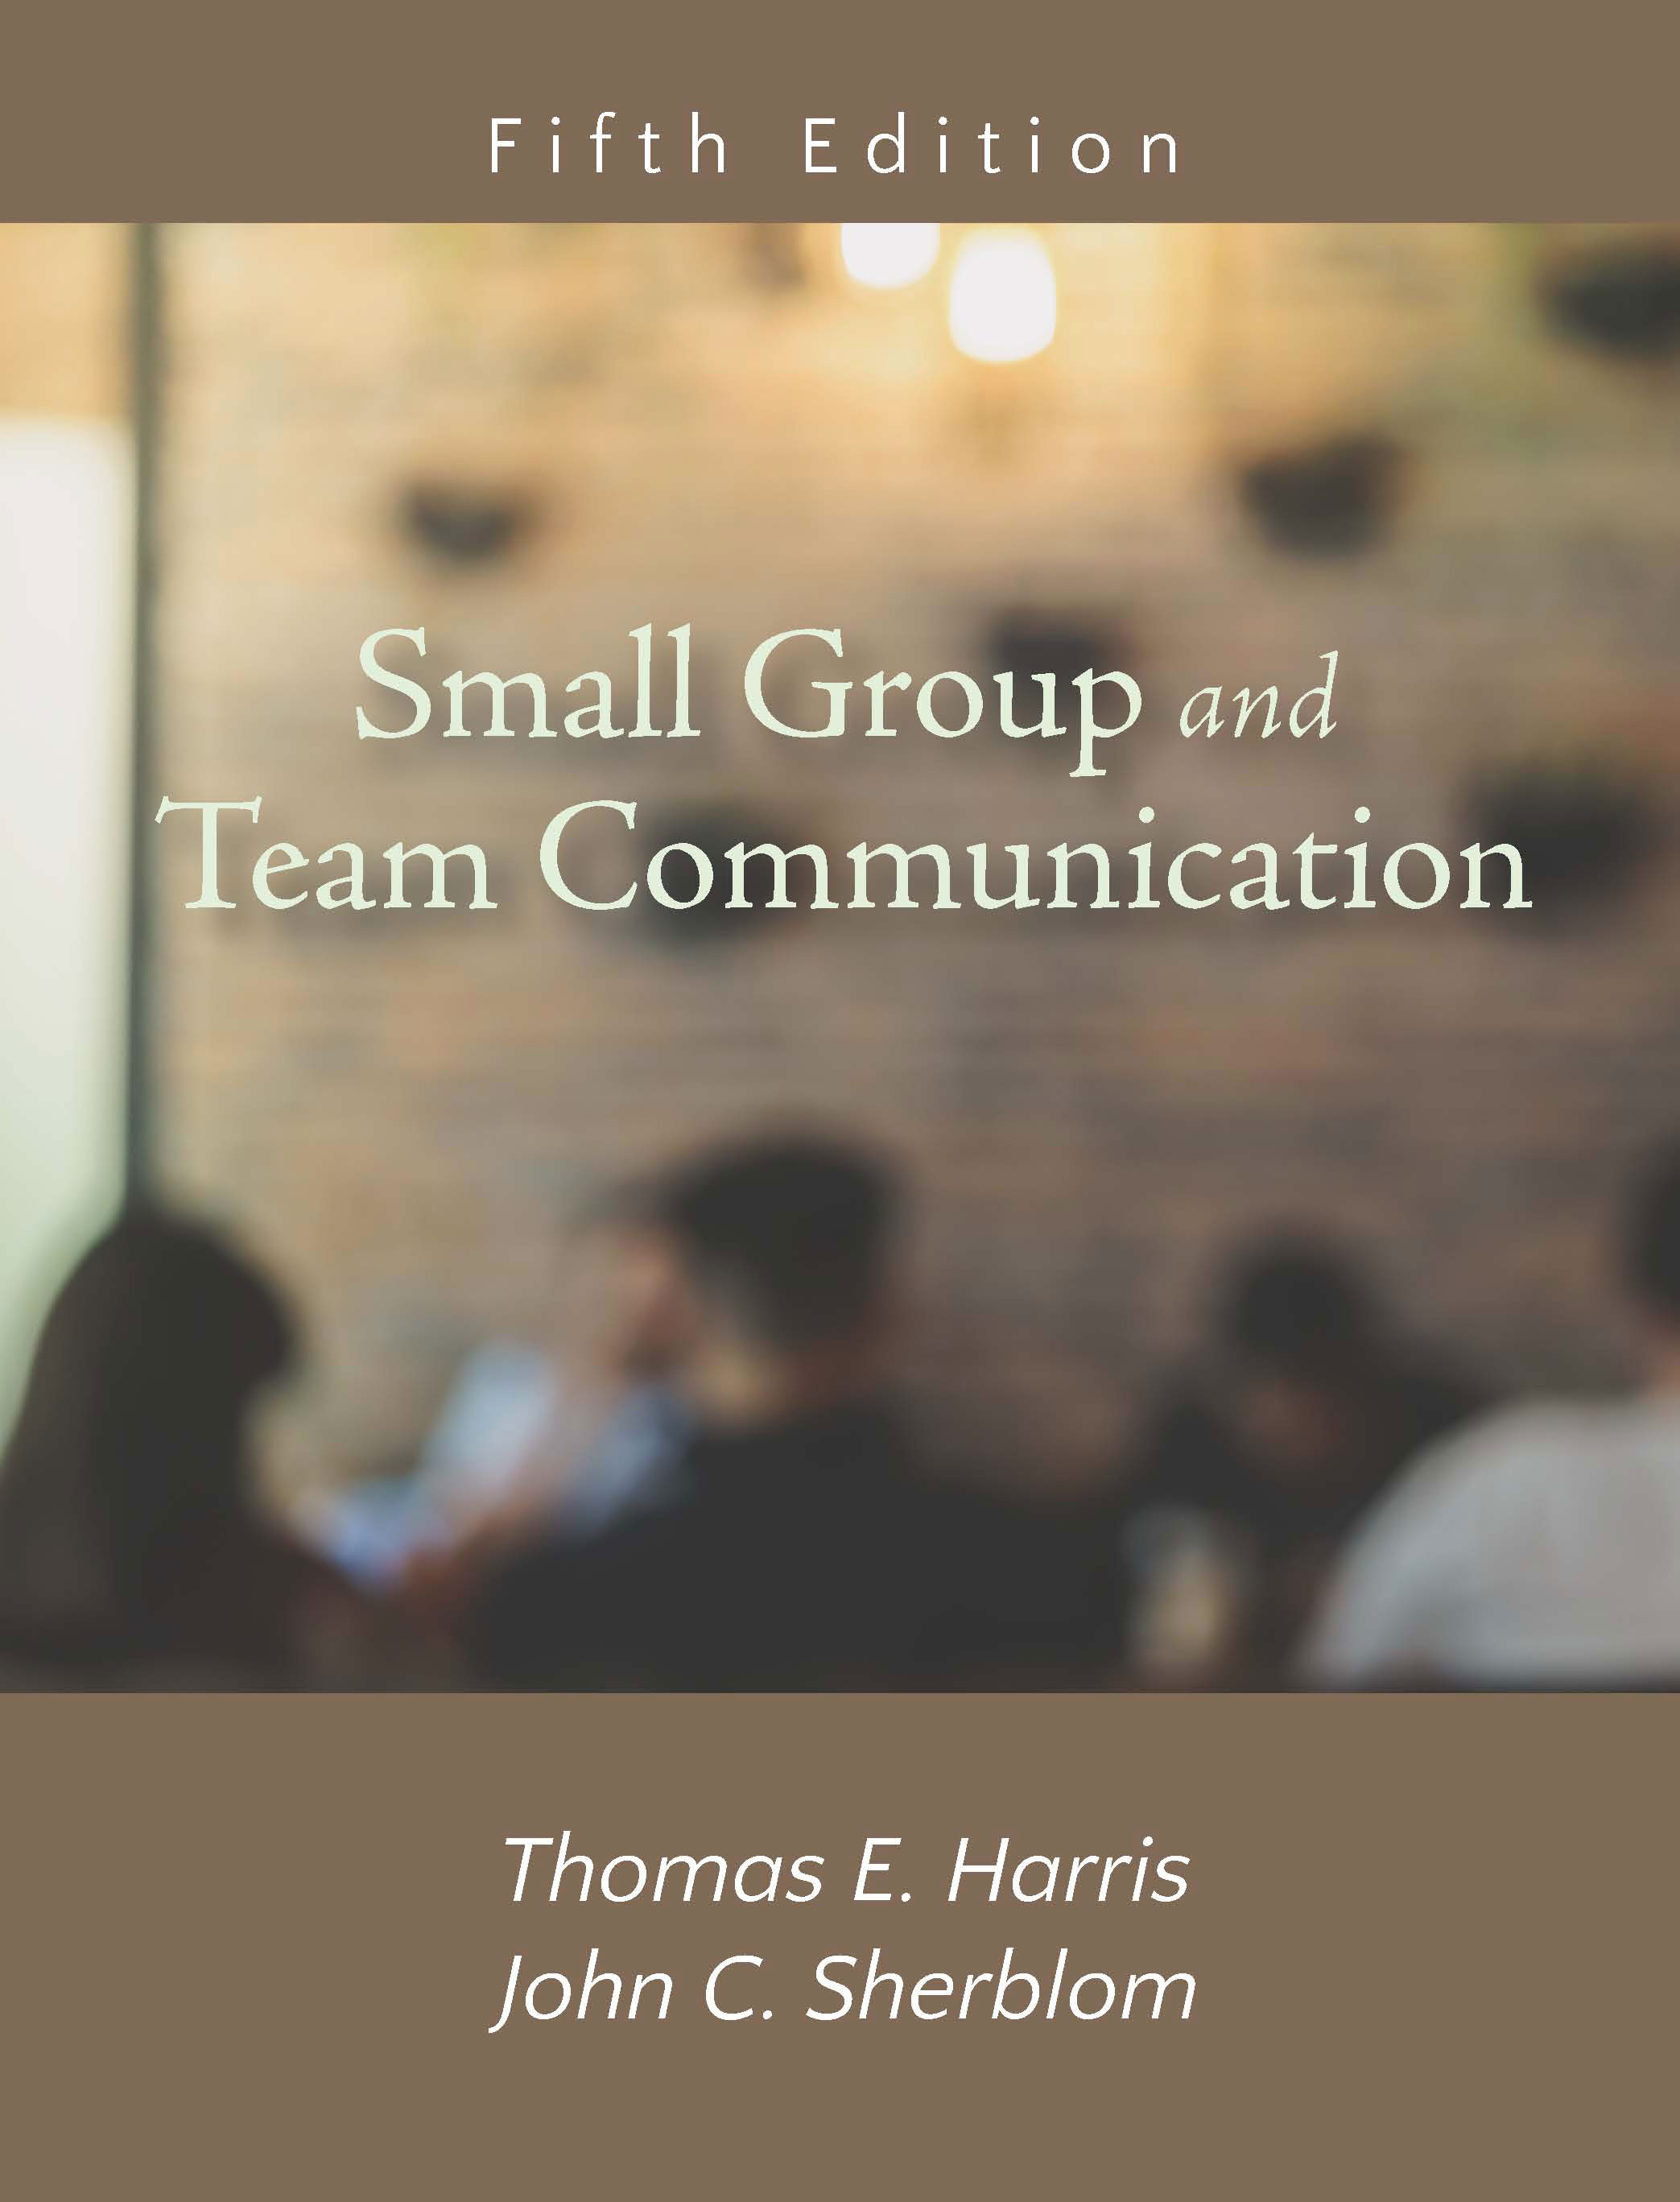 Small Group and Team Communication: Fifth Edition by Thomas E. Harris, John C. Sherblom